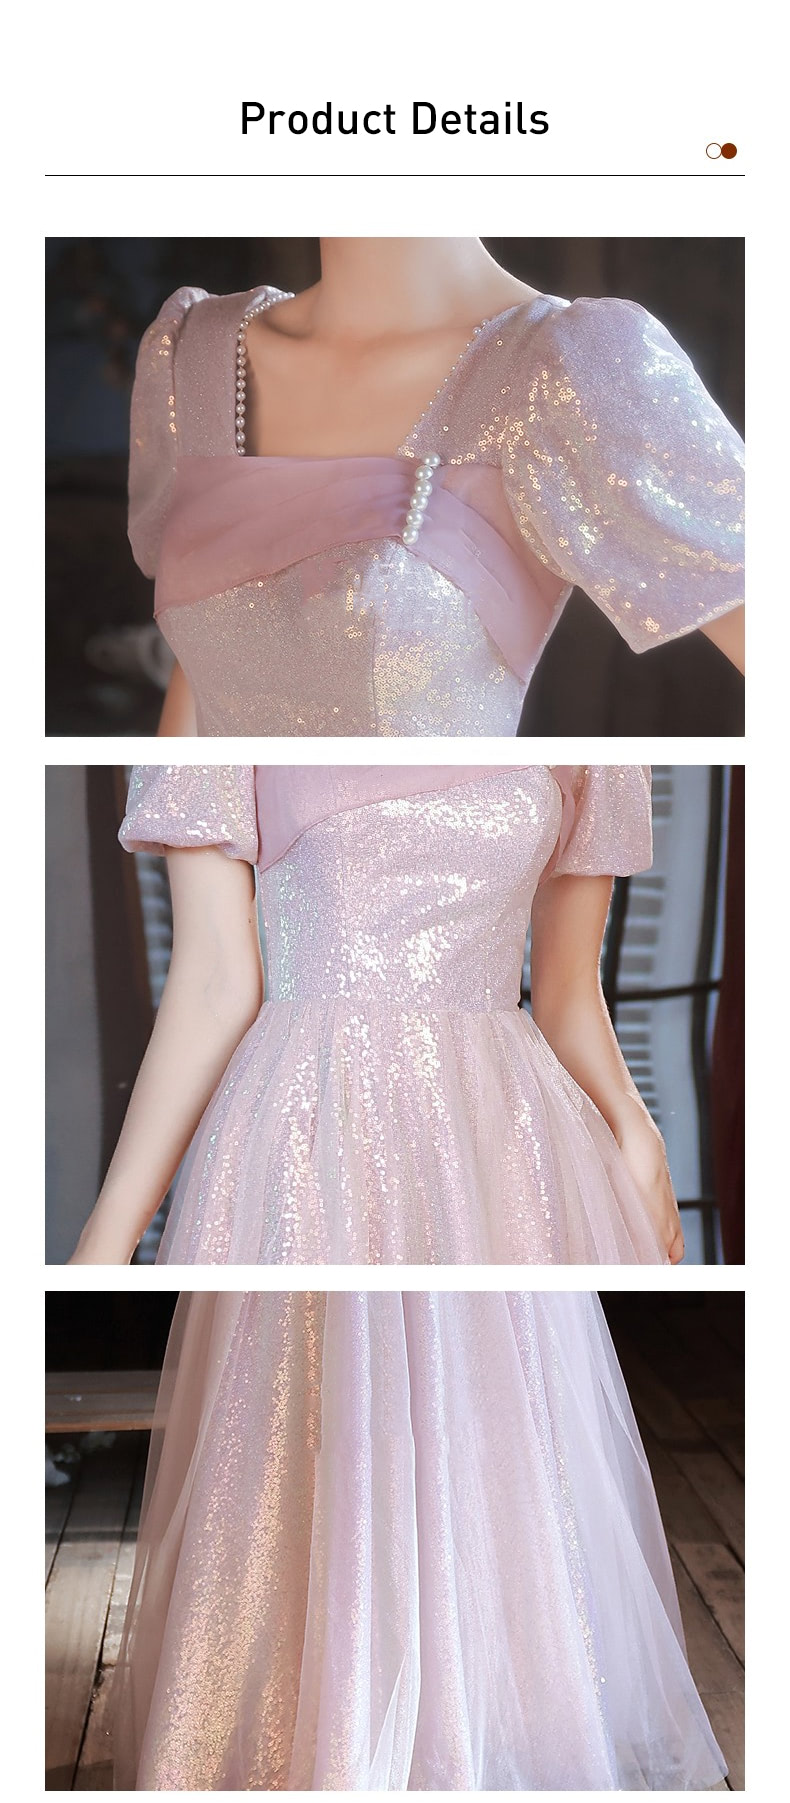 Fairy-Square-Neck-Pink-Princess-Prom-Evening-Party-Long-Dress16